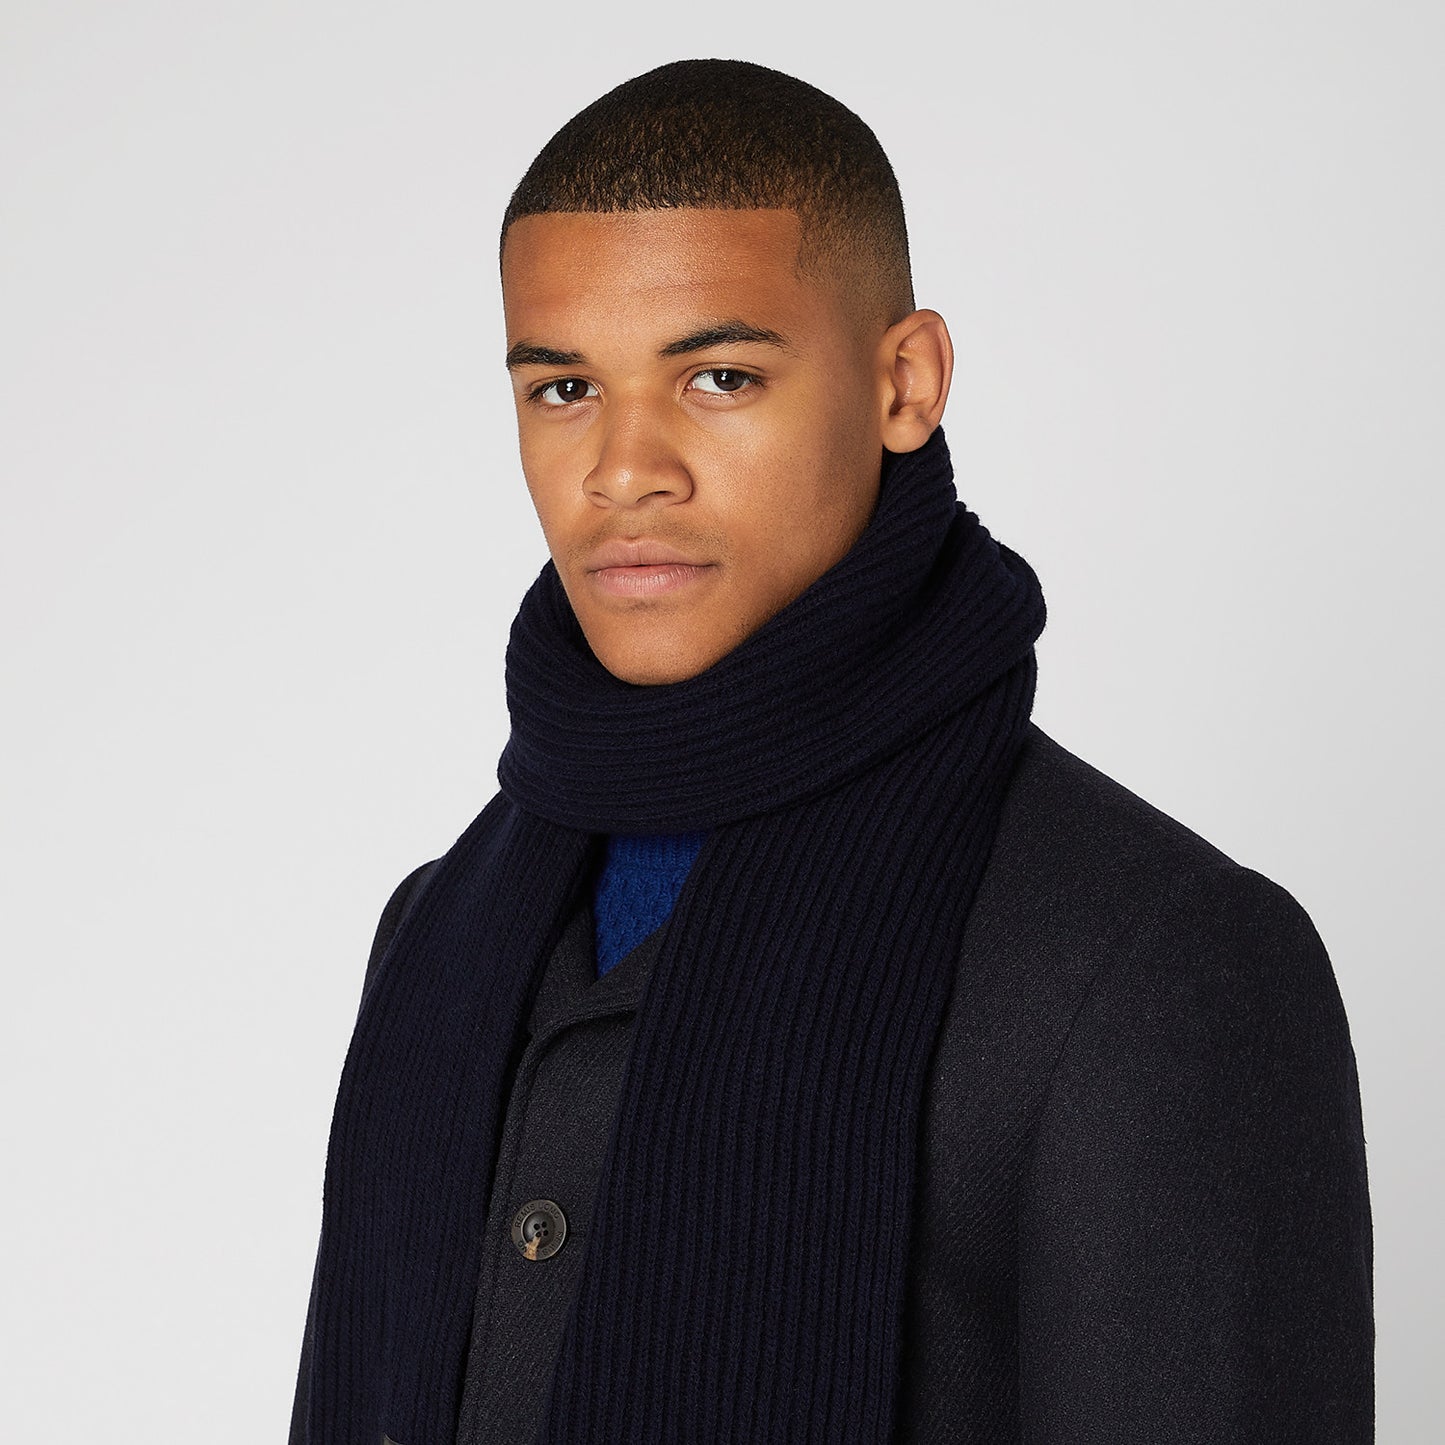 Remus Uomo 58580 78 Navy Knitted Scarf